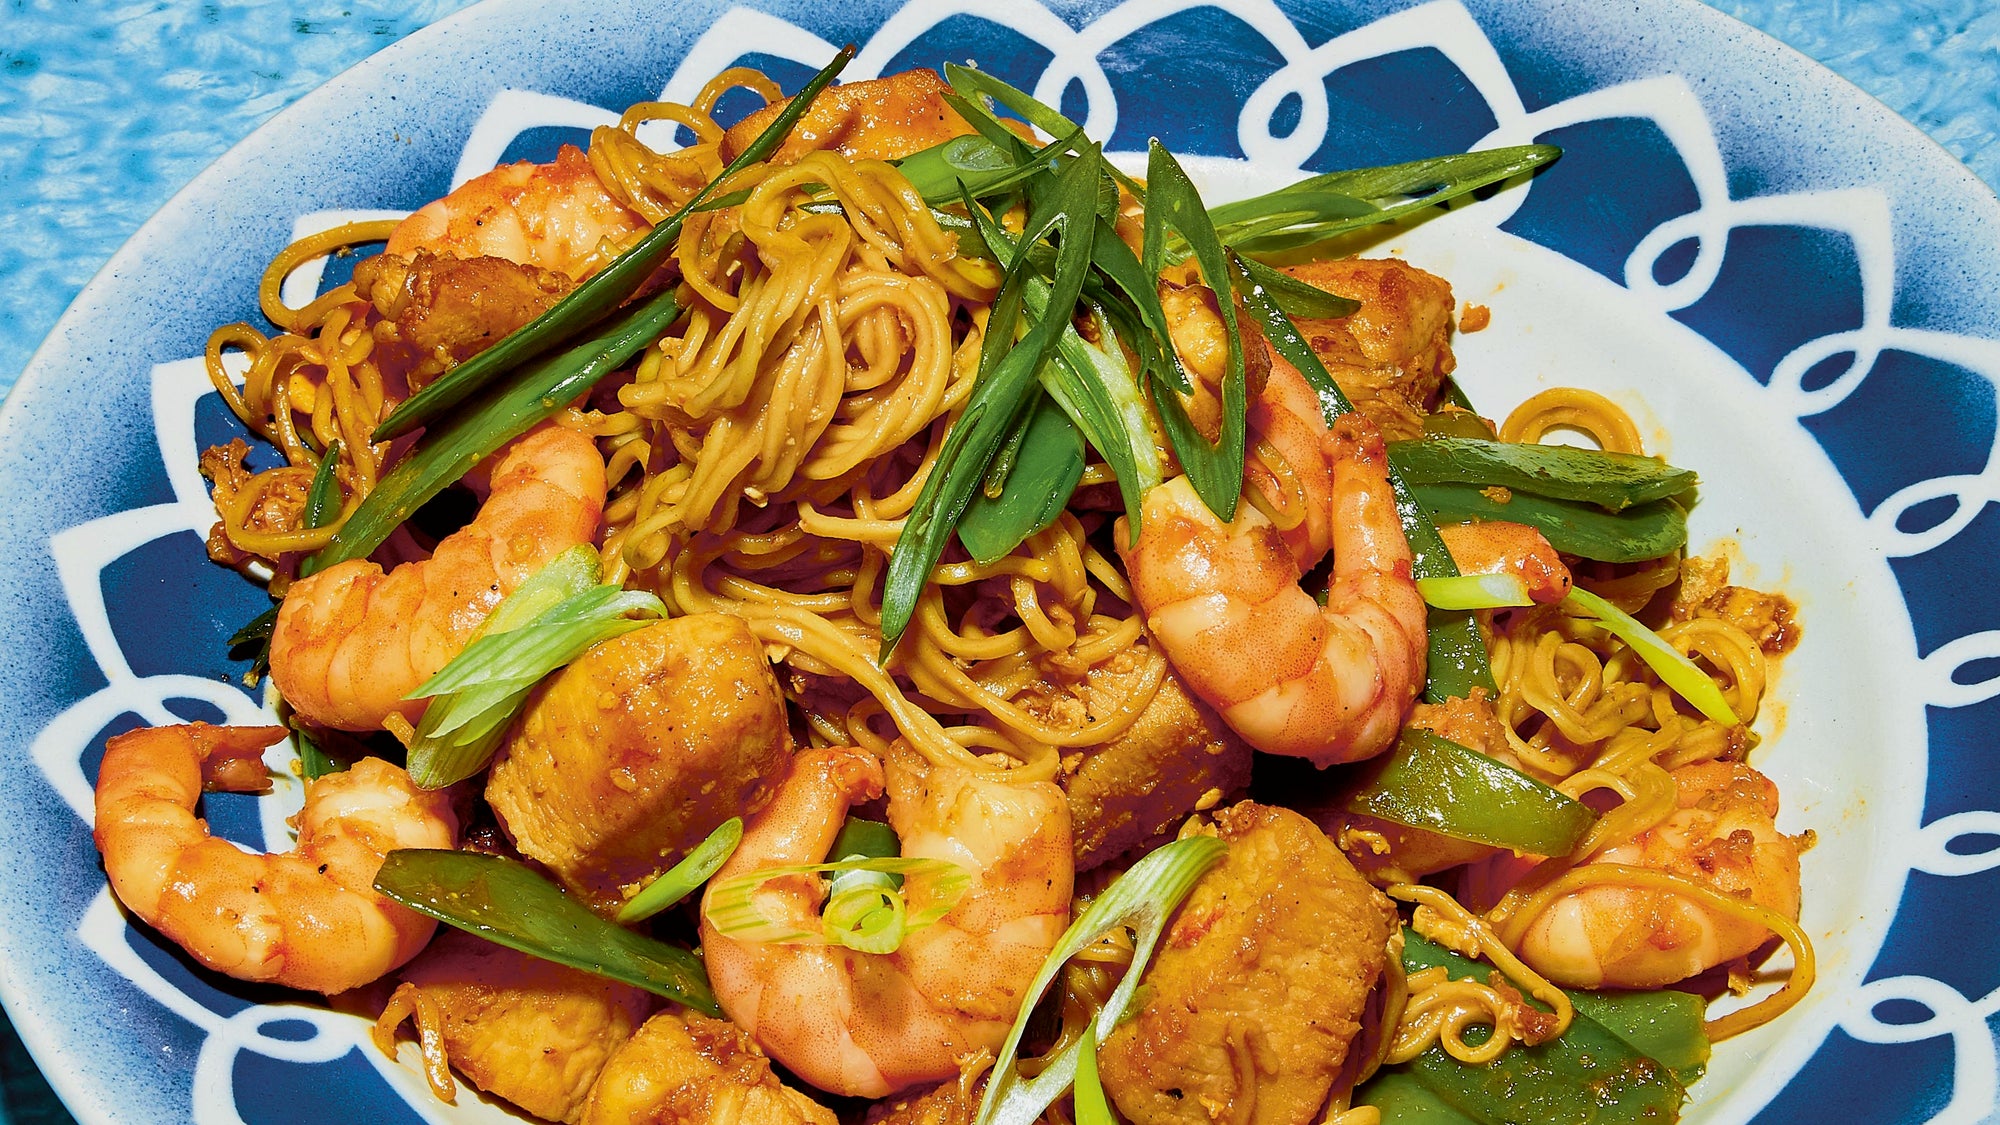 Prawn and Chicken Fried Noodles (Mie Goreng Udang)